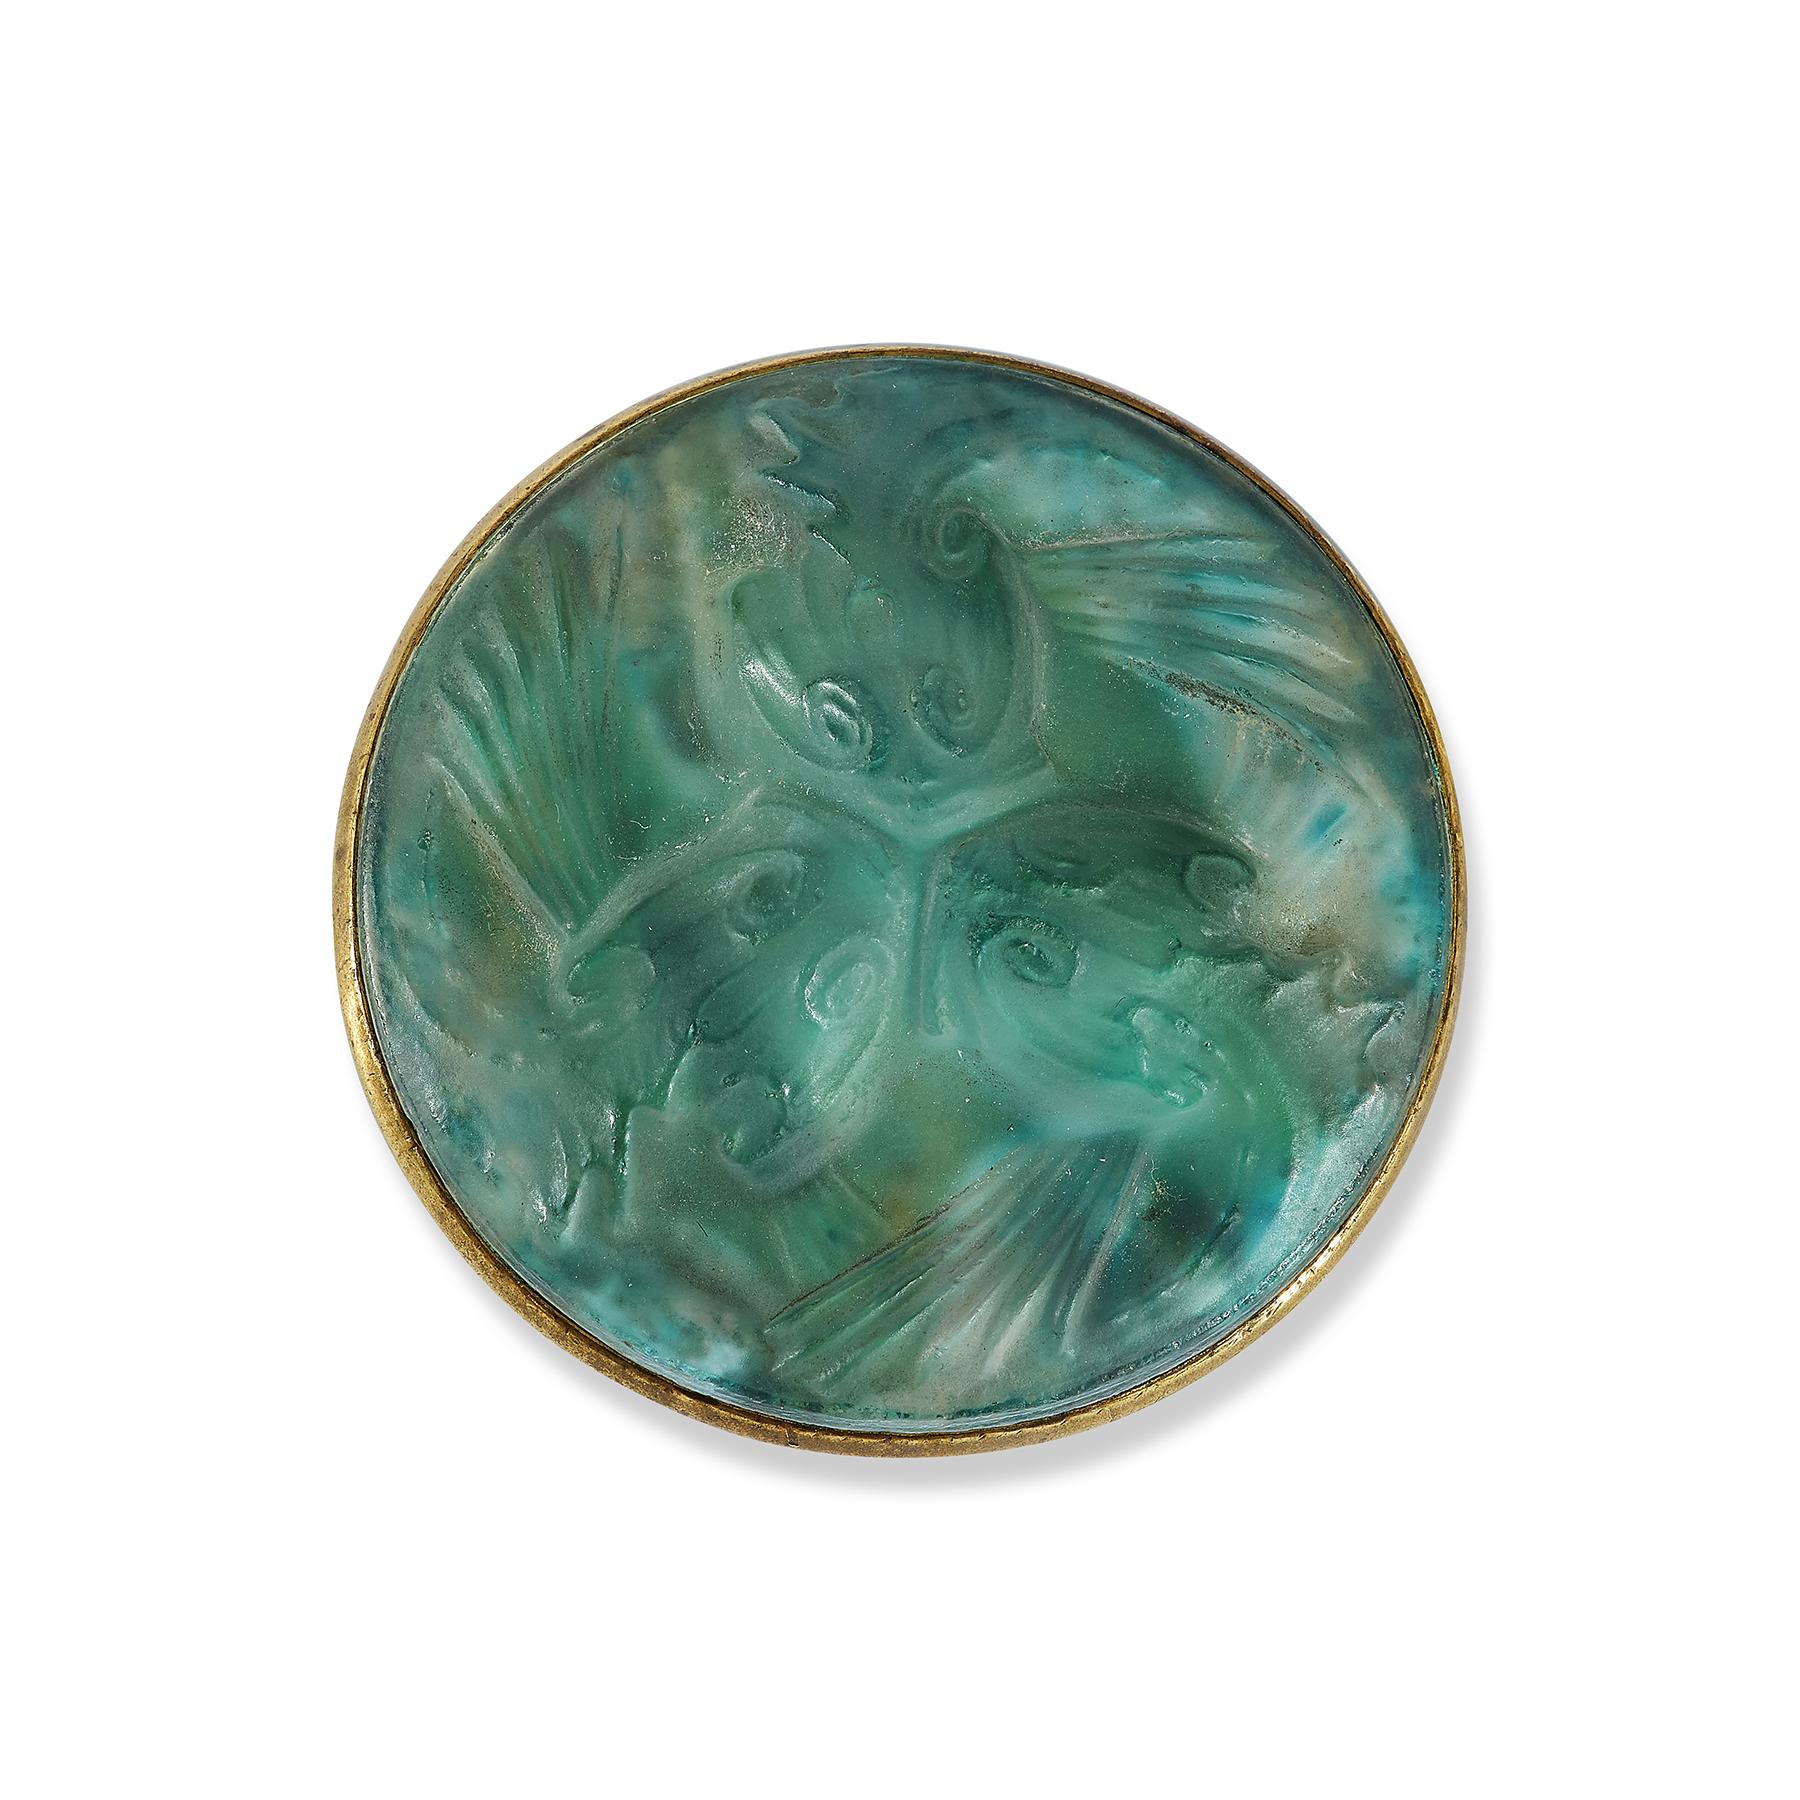 Lalique Glass Fish Brooch

A gold brooch set with green glass

Signed Lalique

Diameter: 1.75